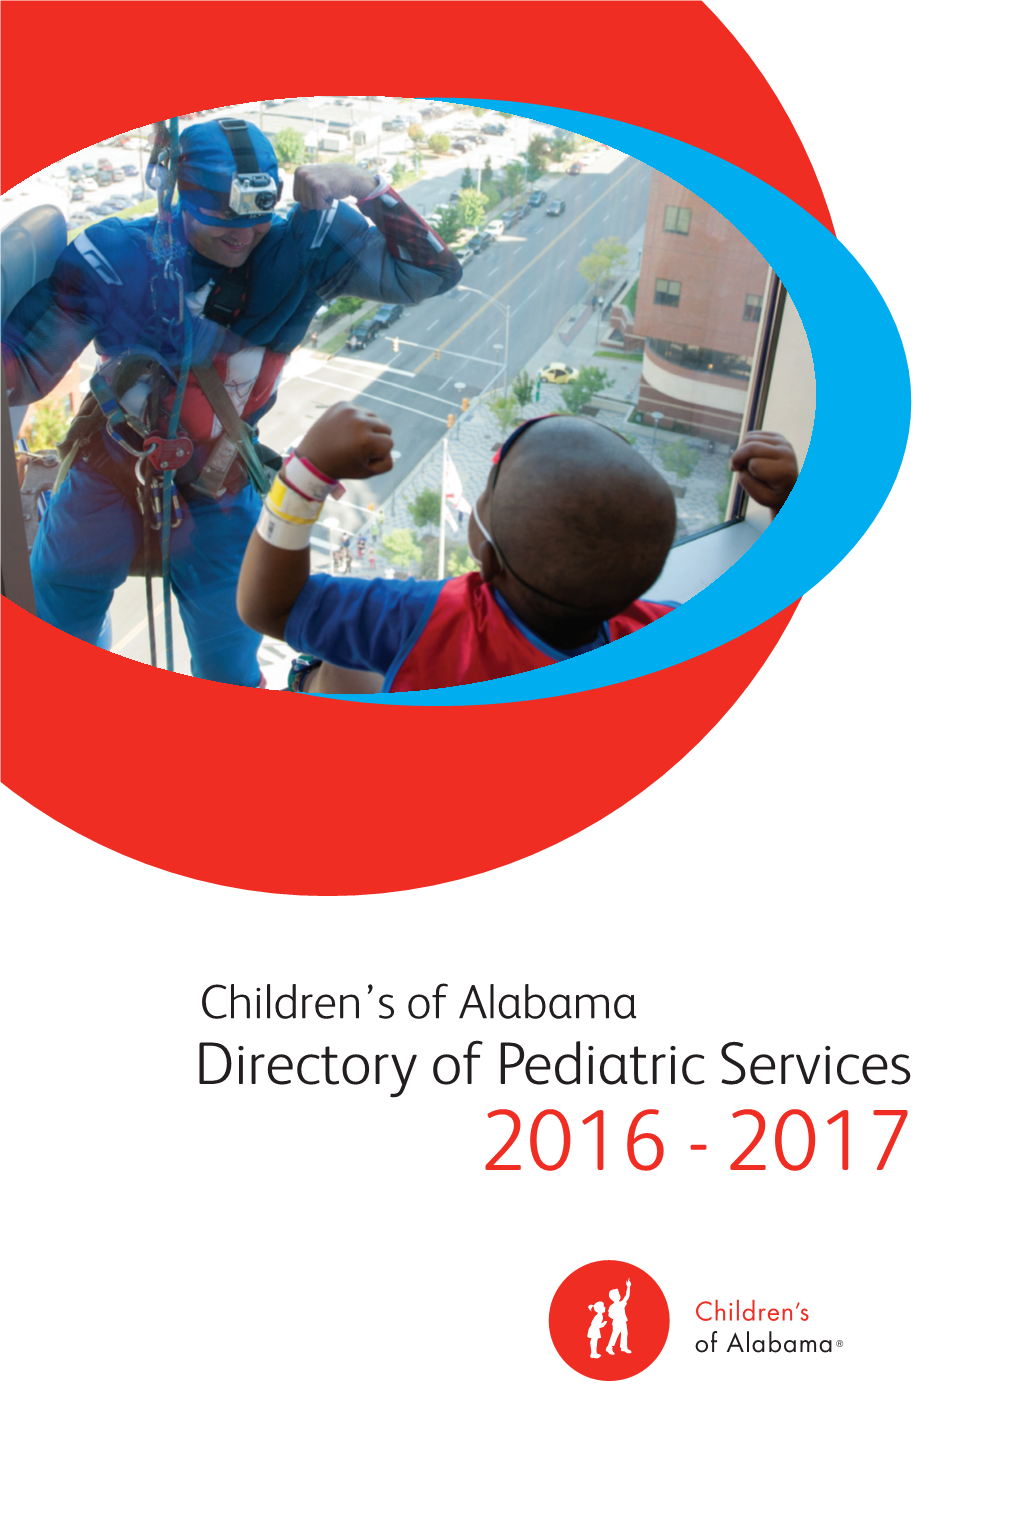 Children's of Alabama Directory of Pediatric Services 2016